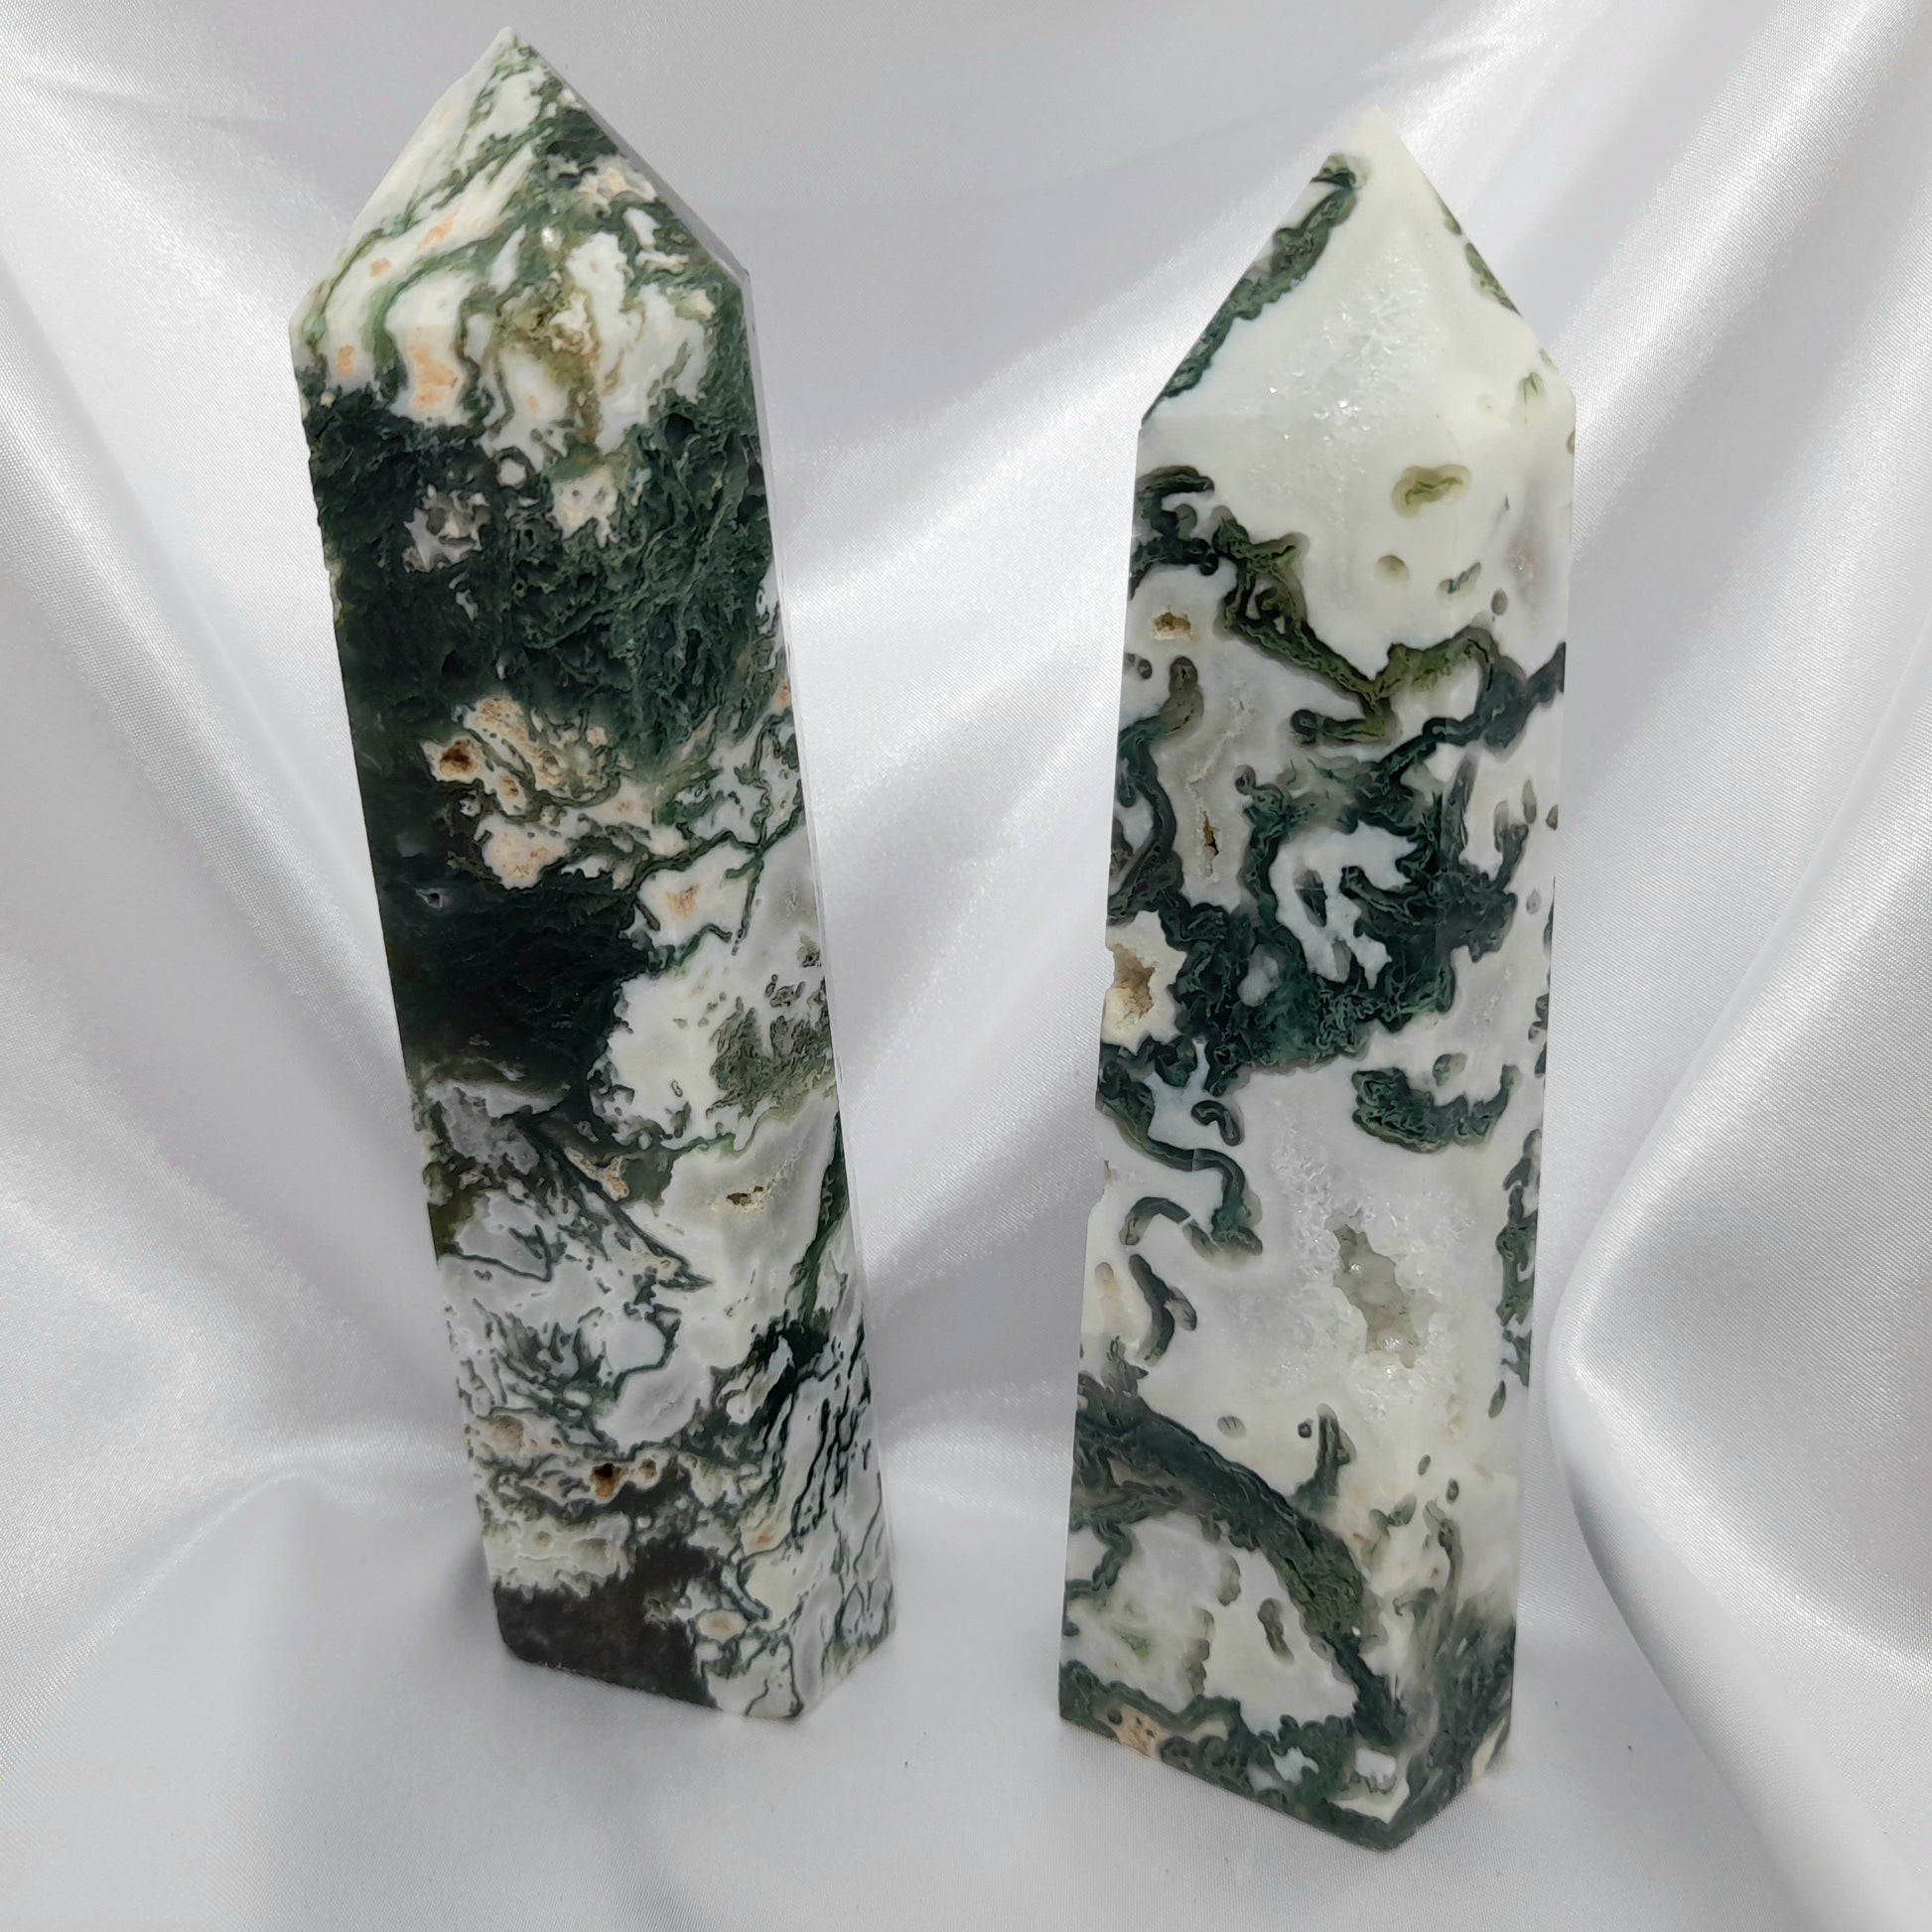 Larger Moss agate tower